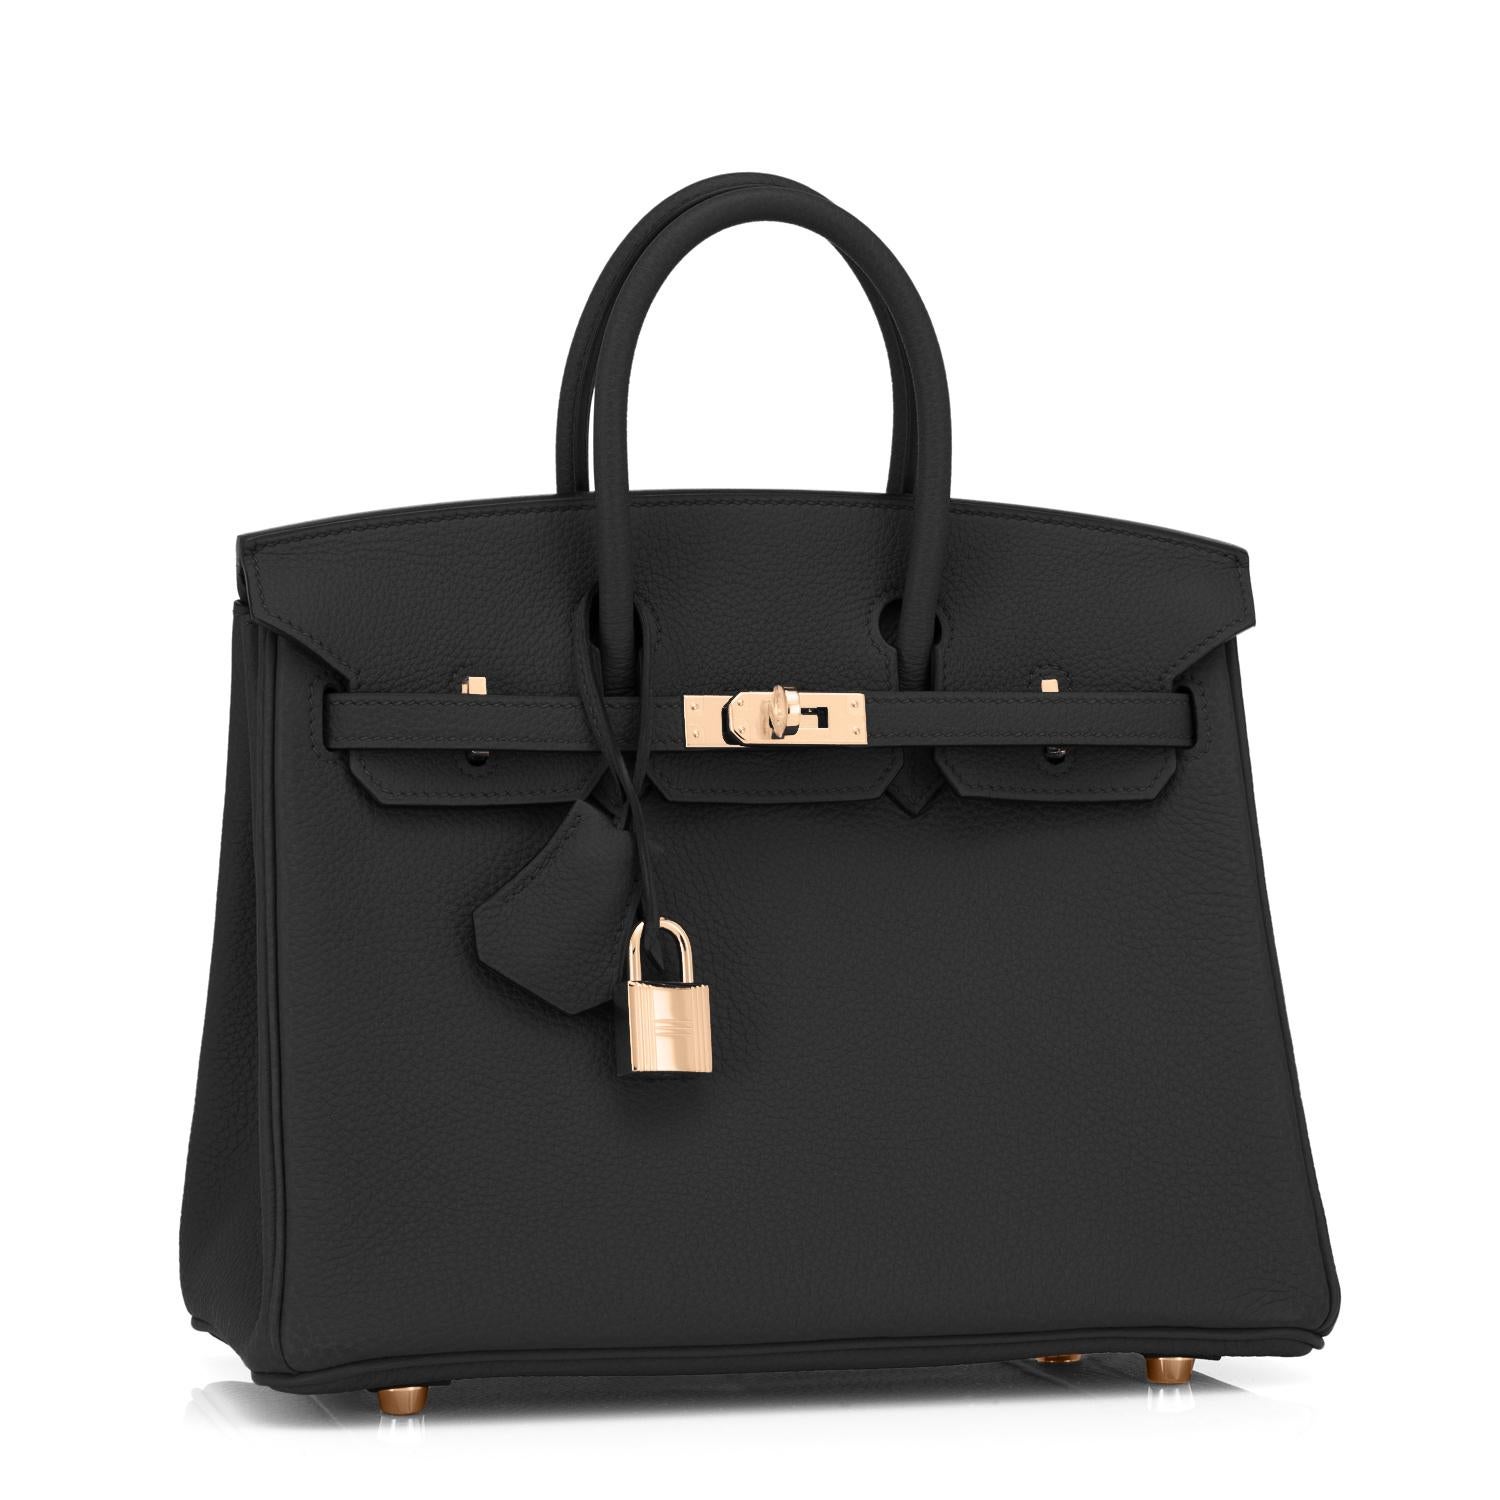 Hermes Black Baby Birkin 25cm Togo Gold Hardware Jewel Y stamp, 2020
Rose Gold hardware is so rare in production; this is the most coveted combo for fall!
Brand New in Box. Store Fresh. Pristine Condition (with plastic on hardware) 
Just purchased